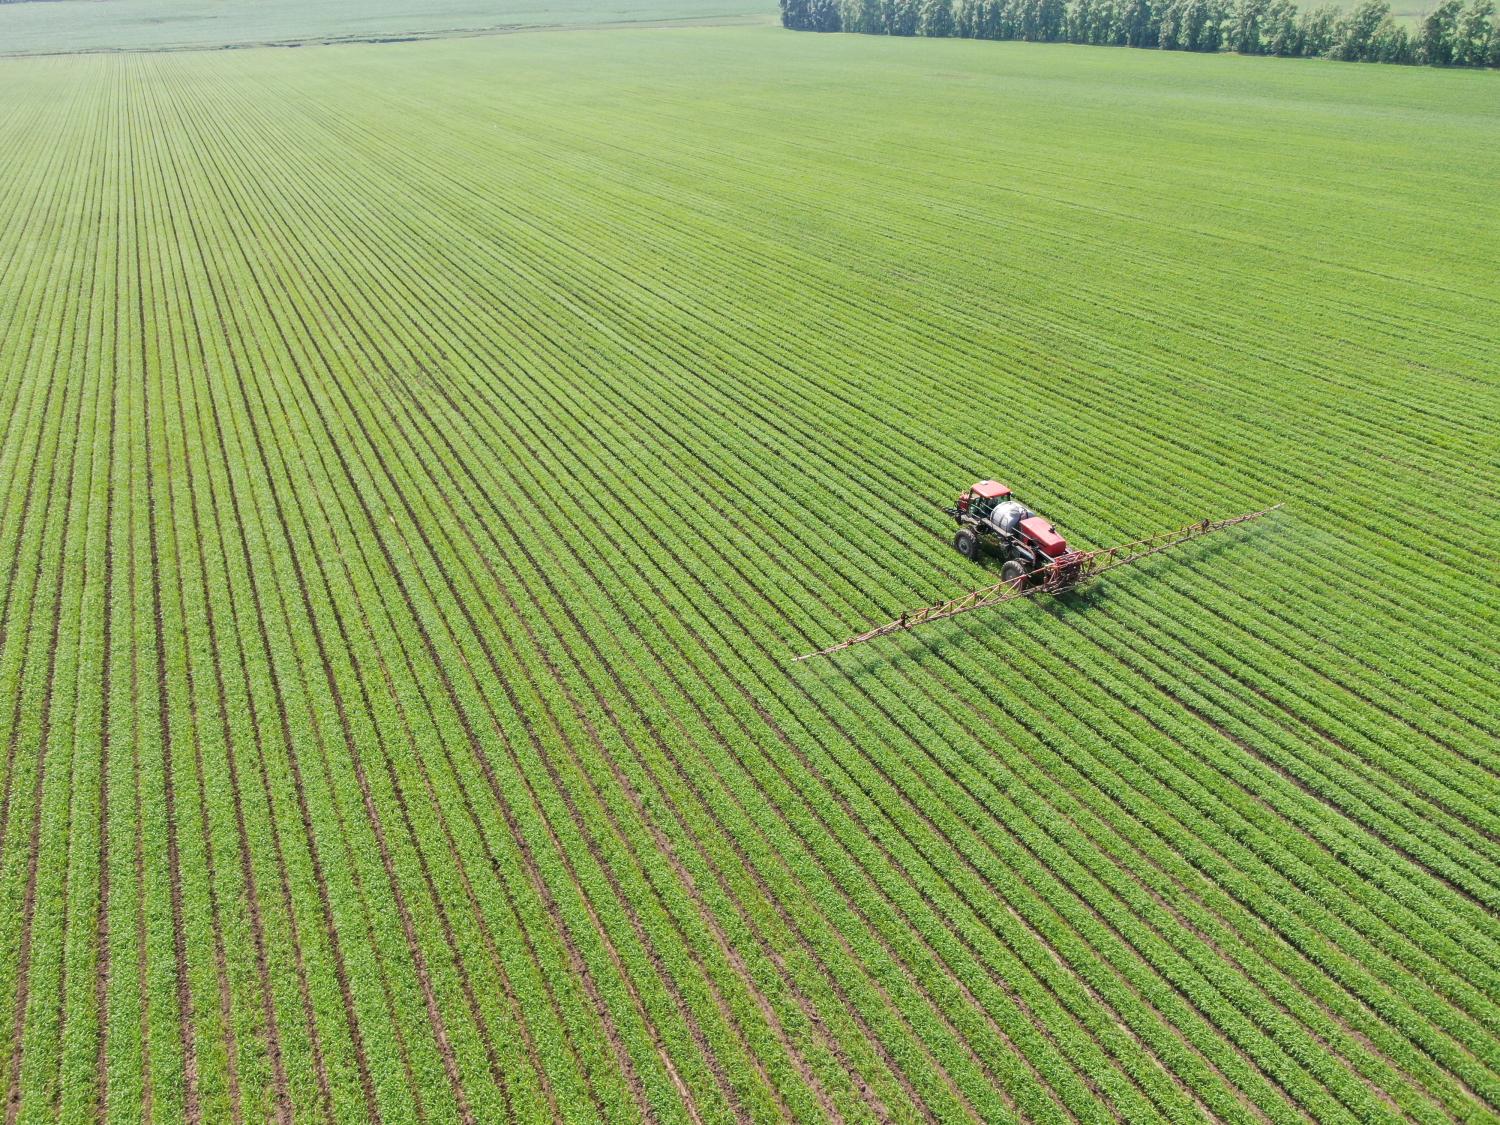 A tractor works in a field in Qiqihar city, northeast China's Heilongjiang province, 1 July 2020.No Use China. No Use France.